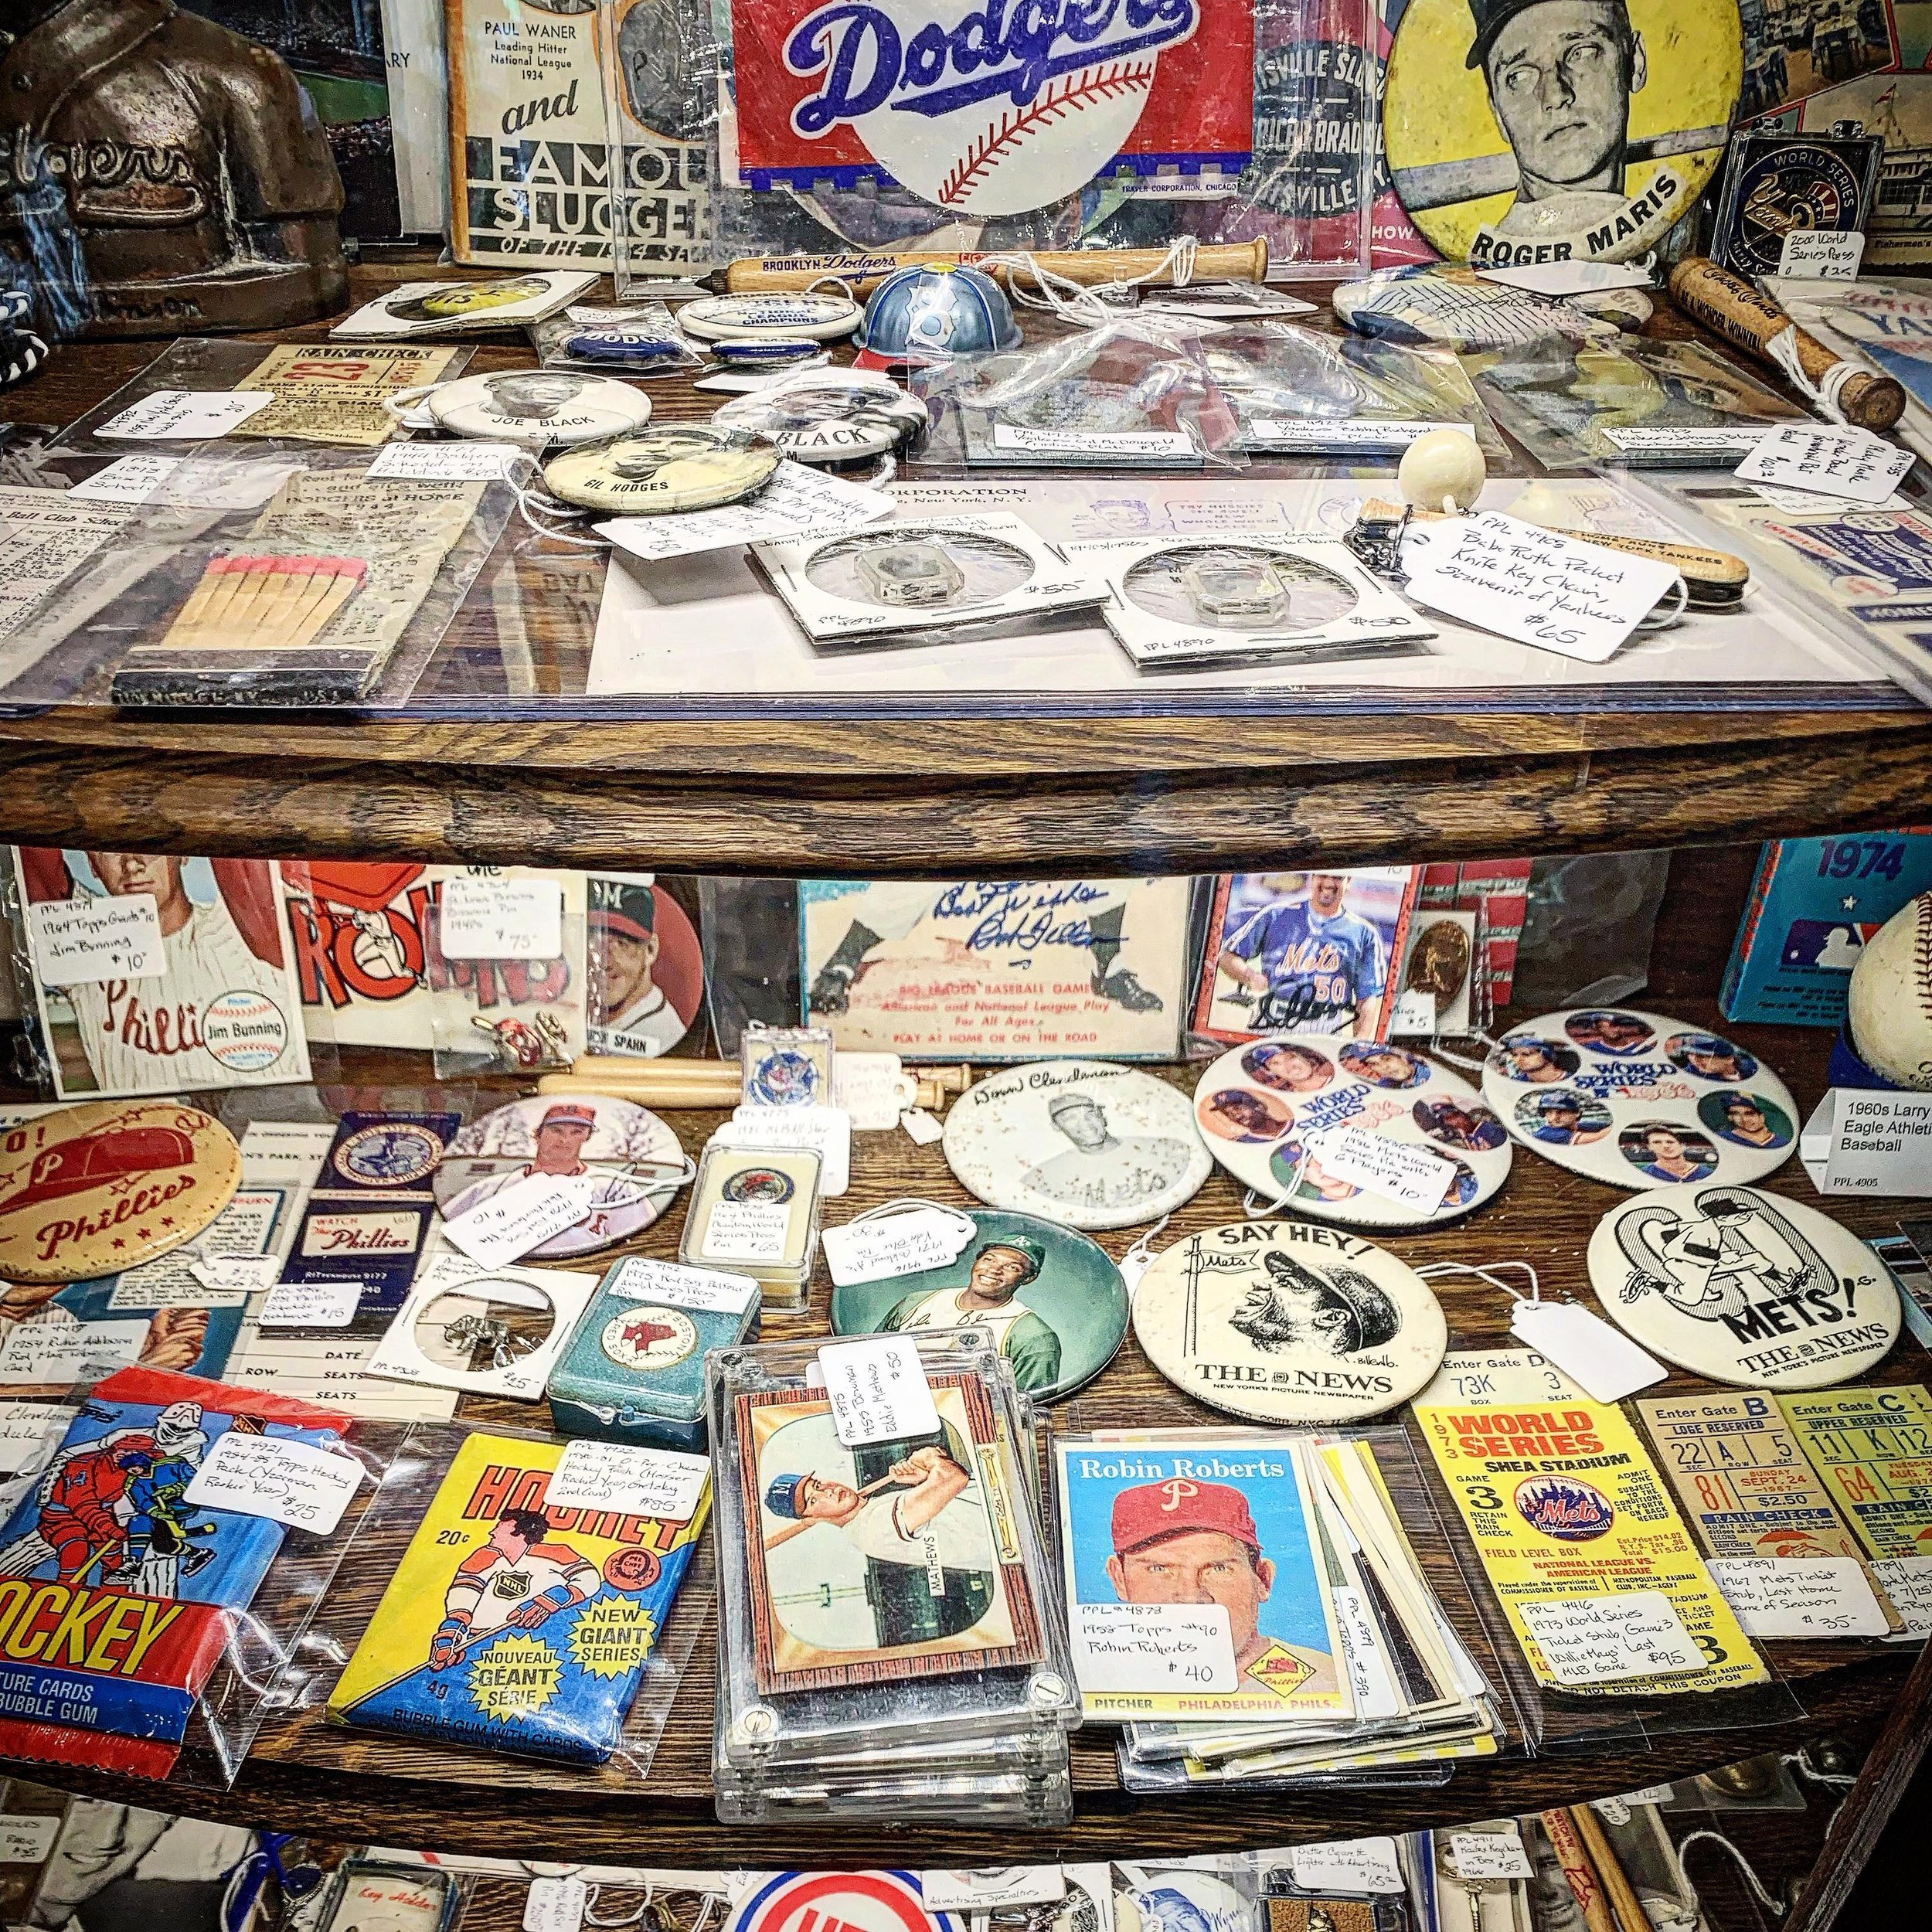 If you know someone who is as serious as we are about collecting Vintage Sports Memorabilia&hellip; make sure they know we have plenty of pieces to add to their collection!
✨❤️⚾️🏆⚾️❤️✨
&hellip;&hellip;&hellip;&hellip;&hellip;&hellip;&hellip;&hellip;